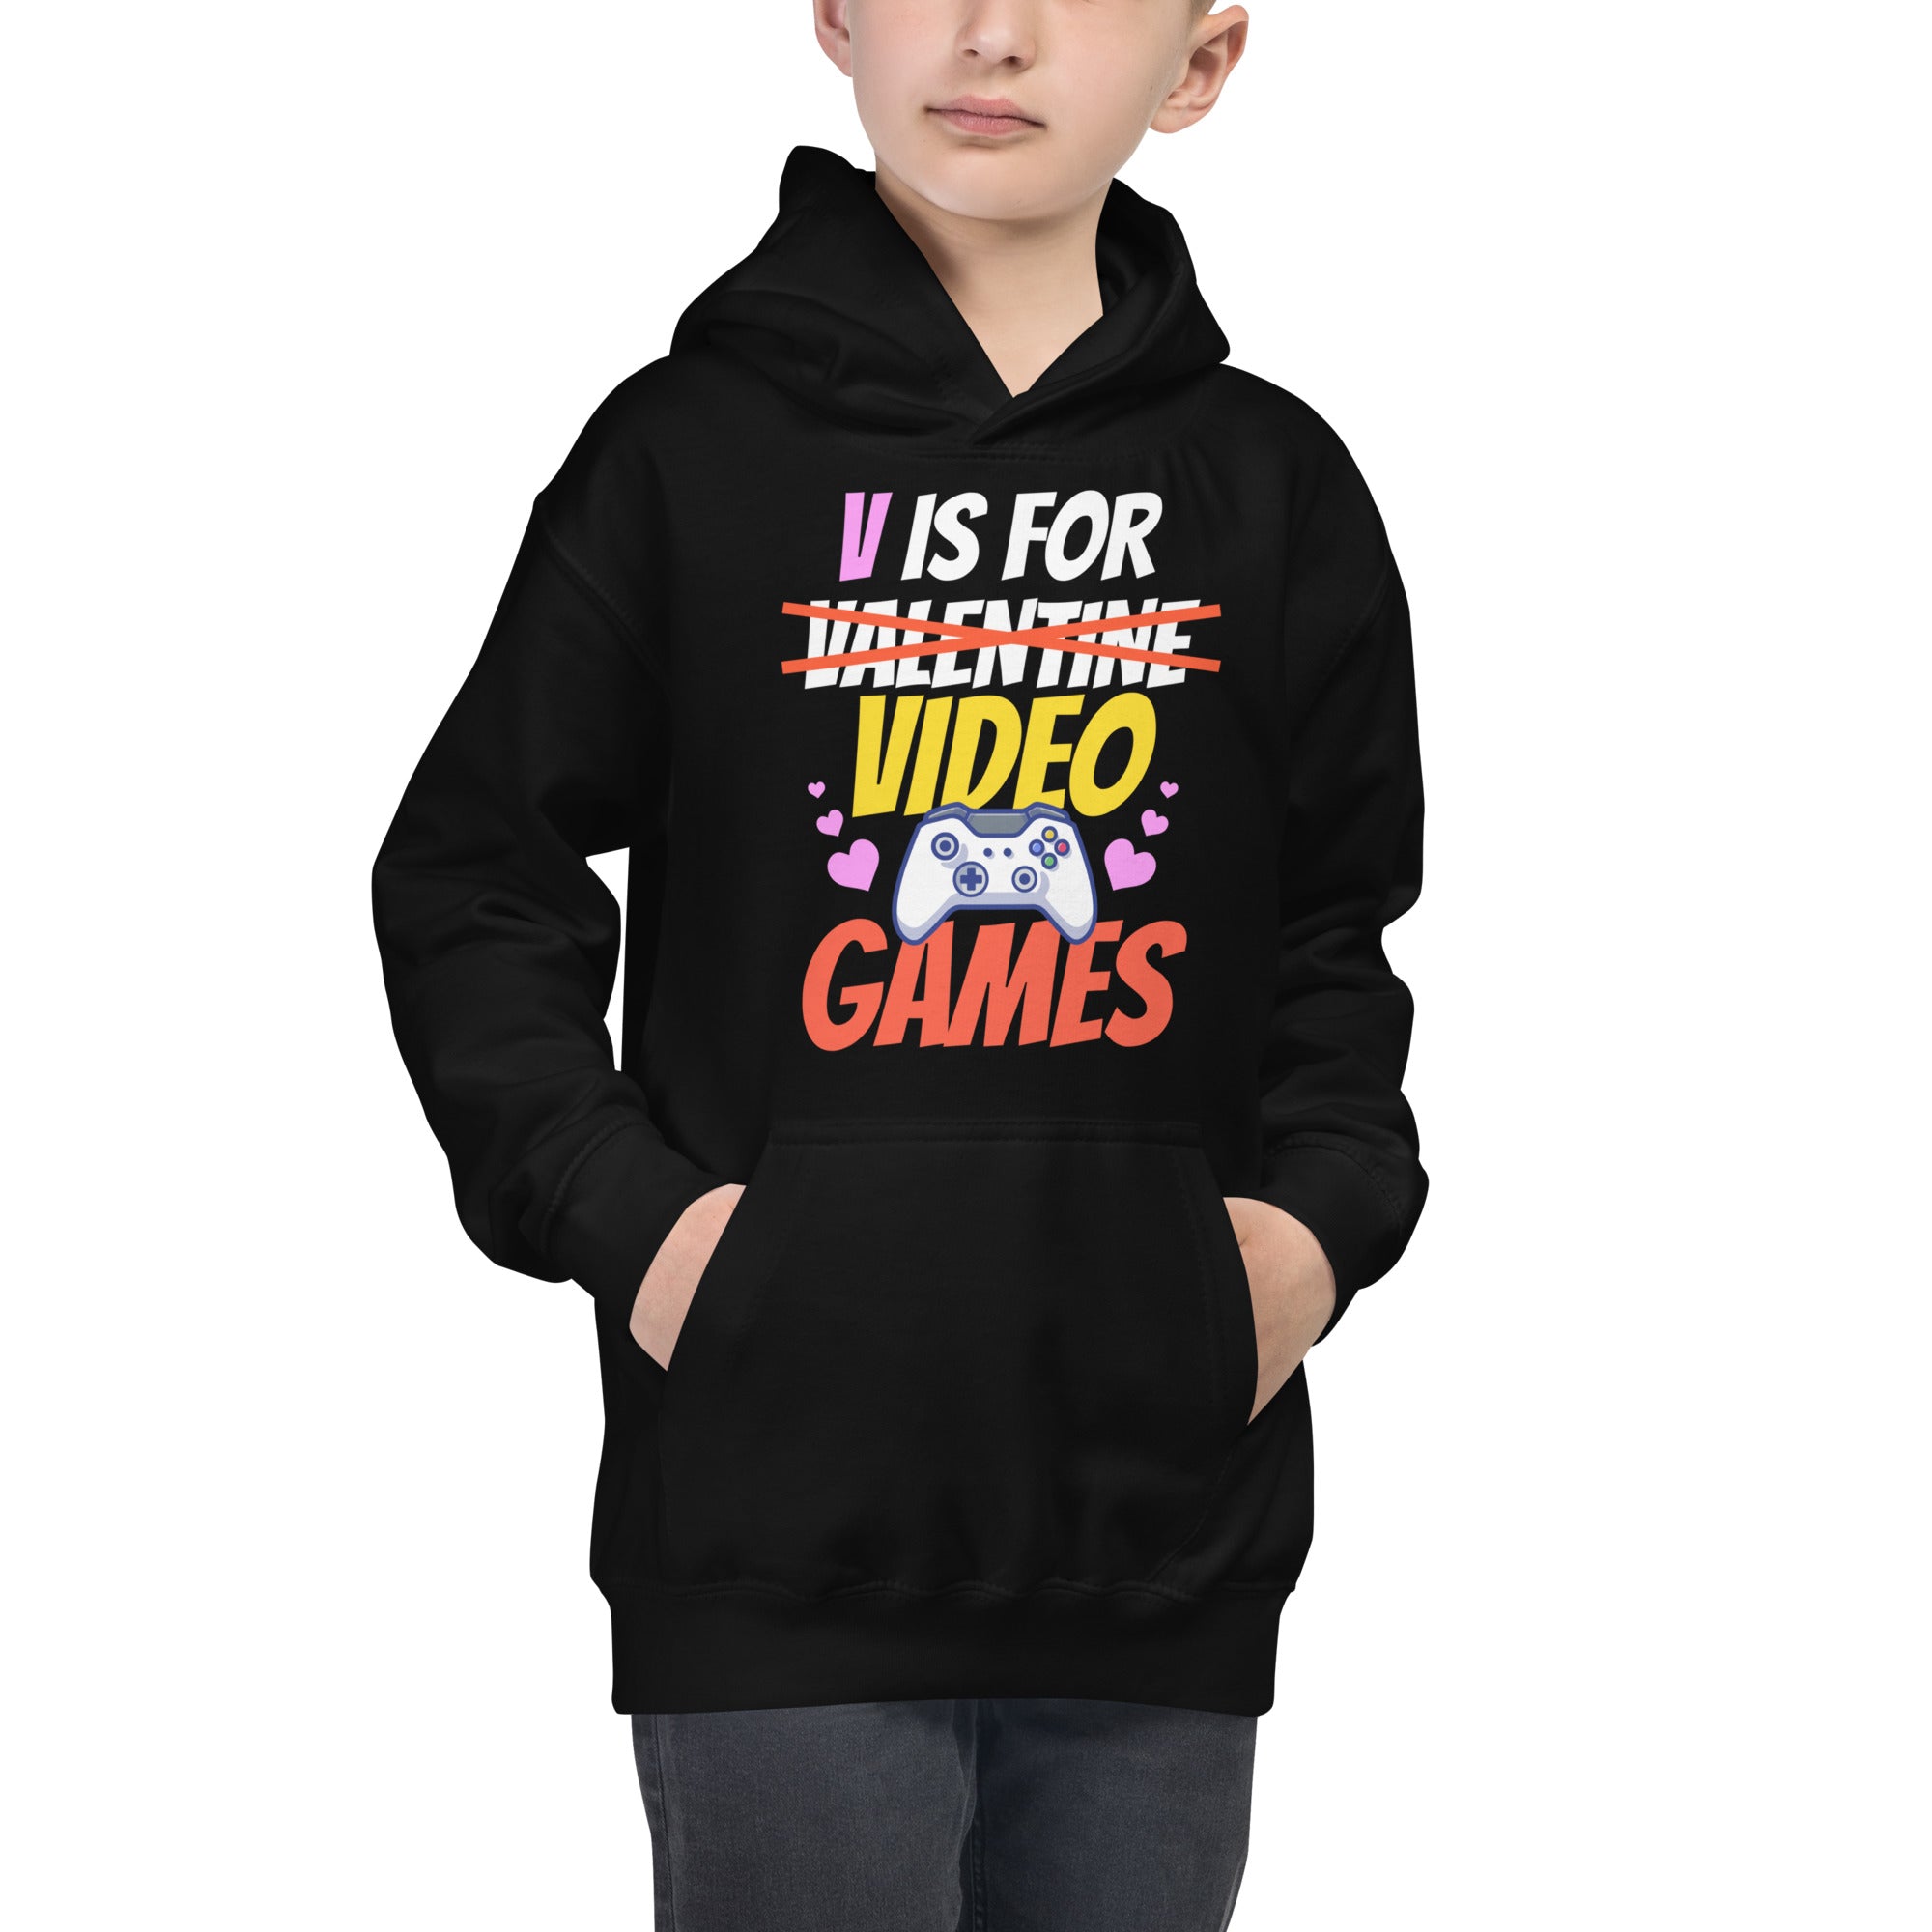 V is for Video Games, Video Game Kids Hoodie, Boys Valentine Shirt, Boys Valentines Day Gifts, Kids Valentine Day Hoodie, Kids Valentine - Madeinsea©